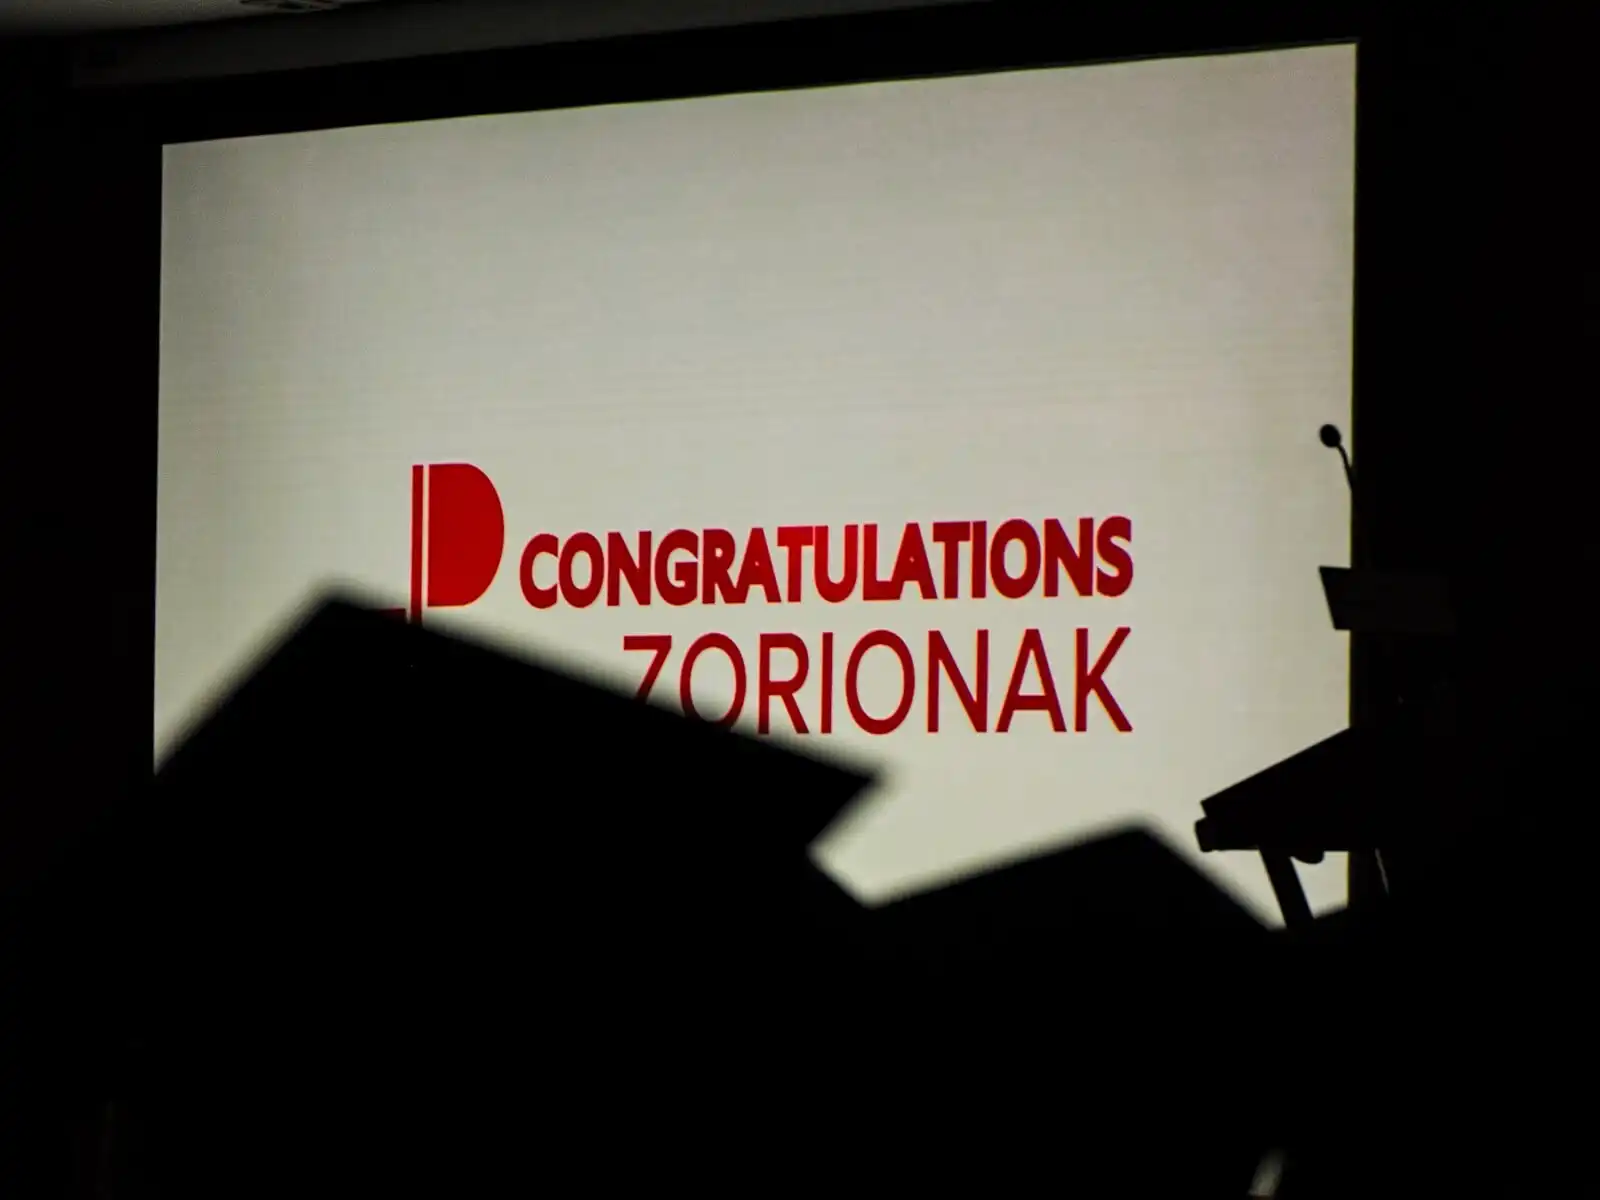 Presentation video from the ceremony, shows greetings message